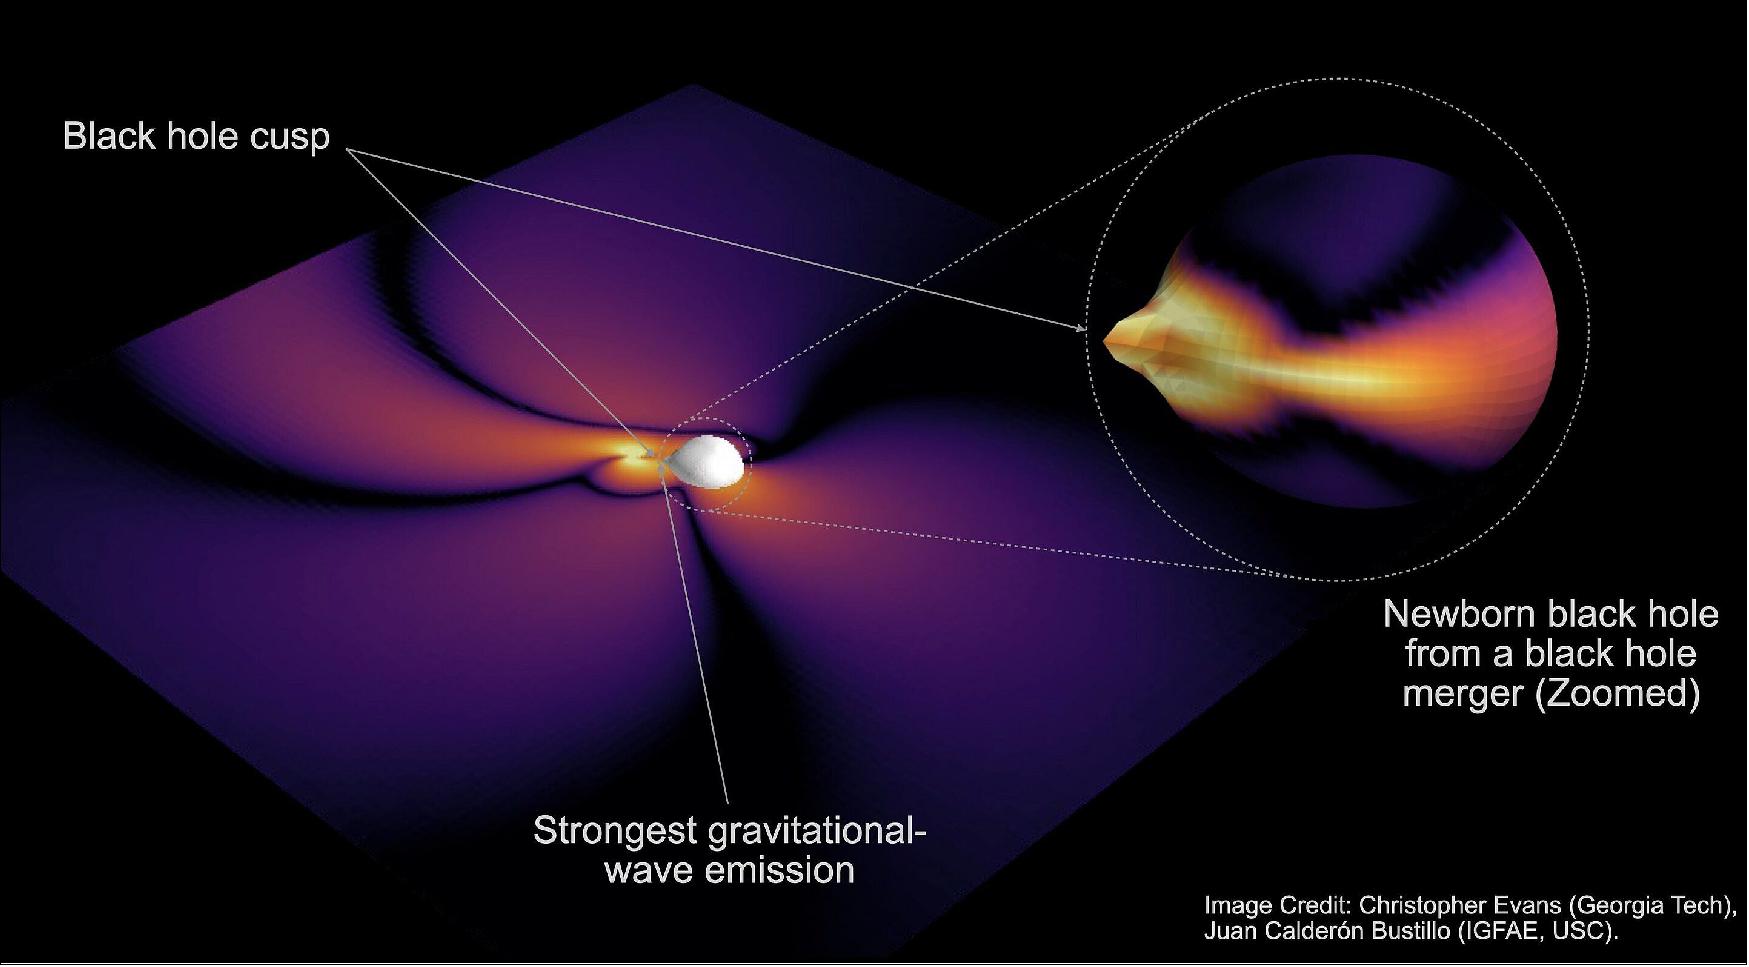 Figure 43: Black hole cusp (image credit: ARC Centre of Excellence for Gravitational Wave Discovery)